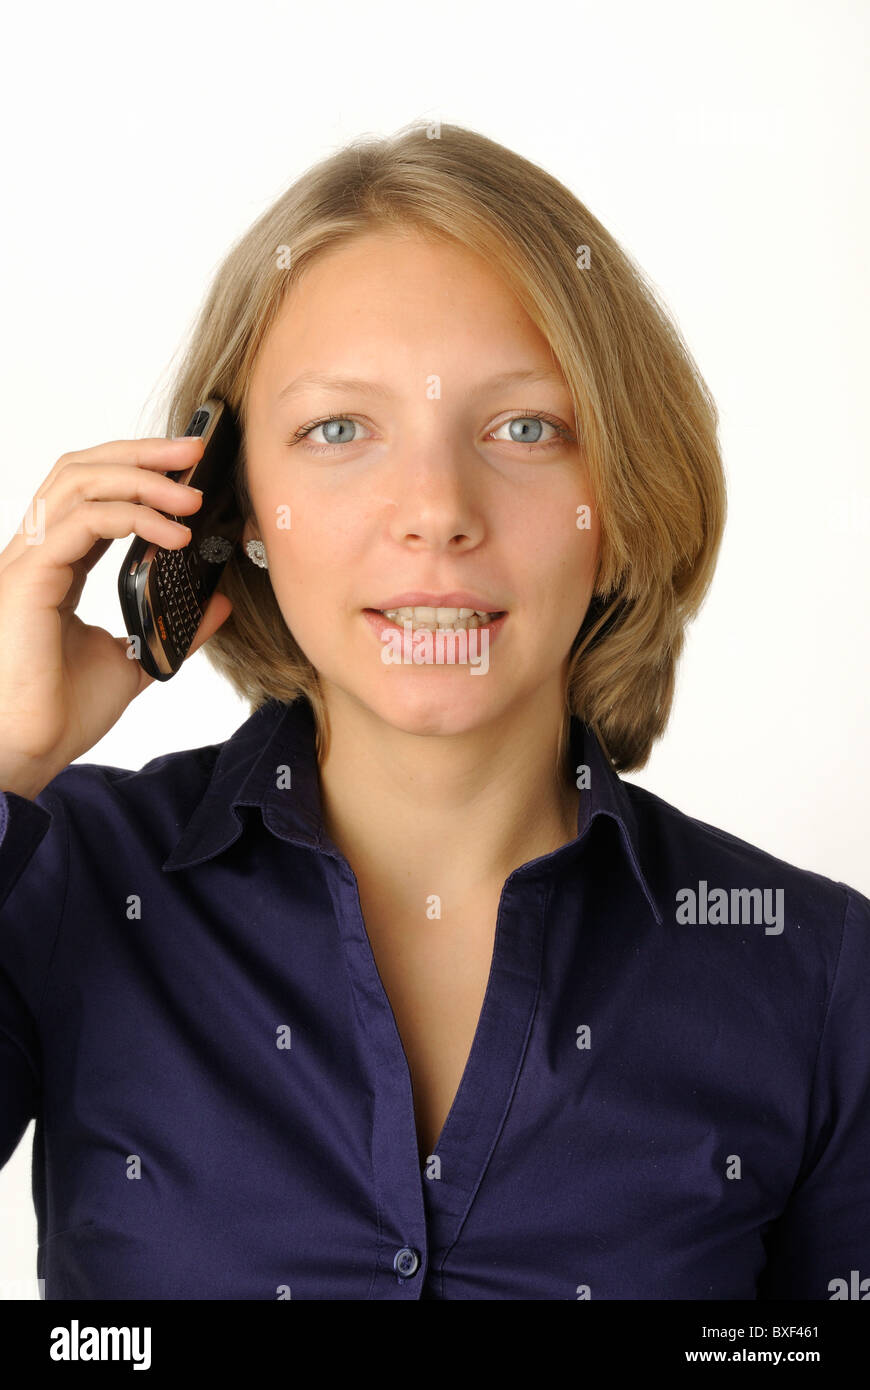 Young woman making a call on a mobile phone Stock Photo